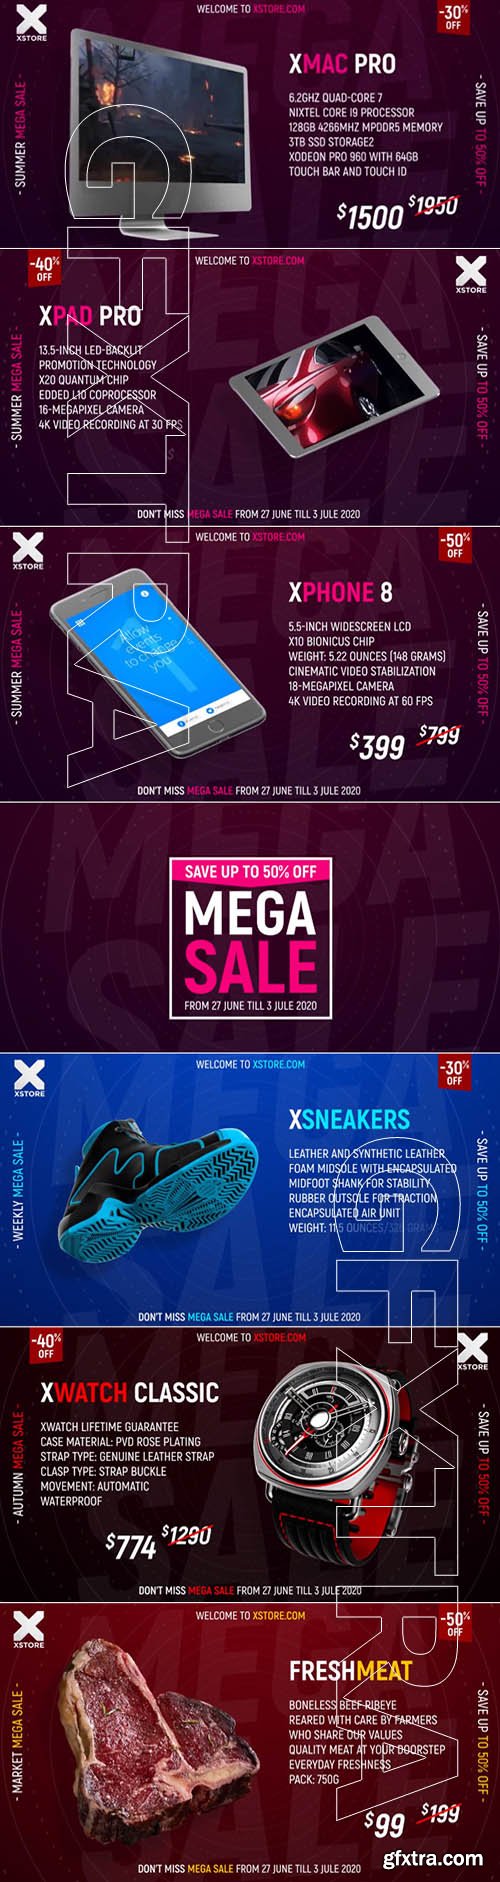 XStore - Sale Promo - After Effects